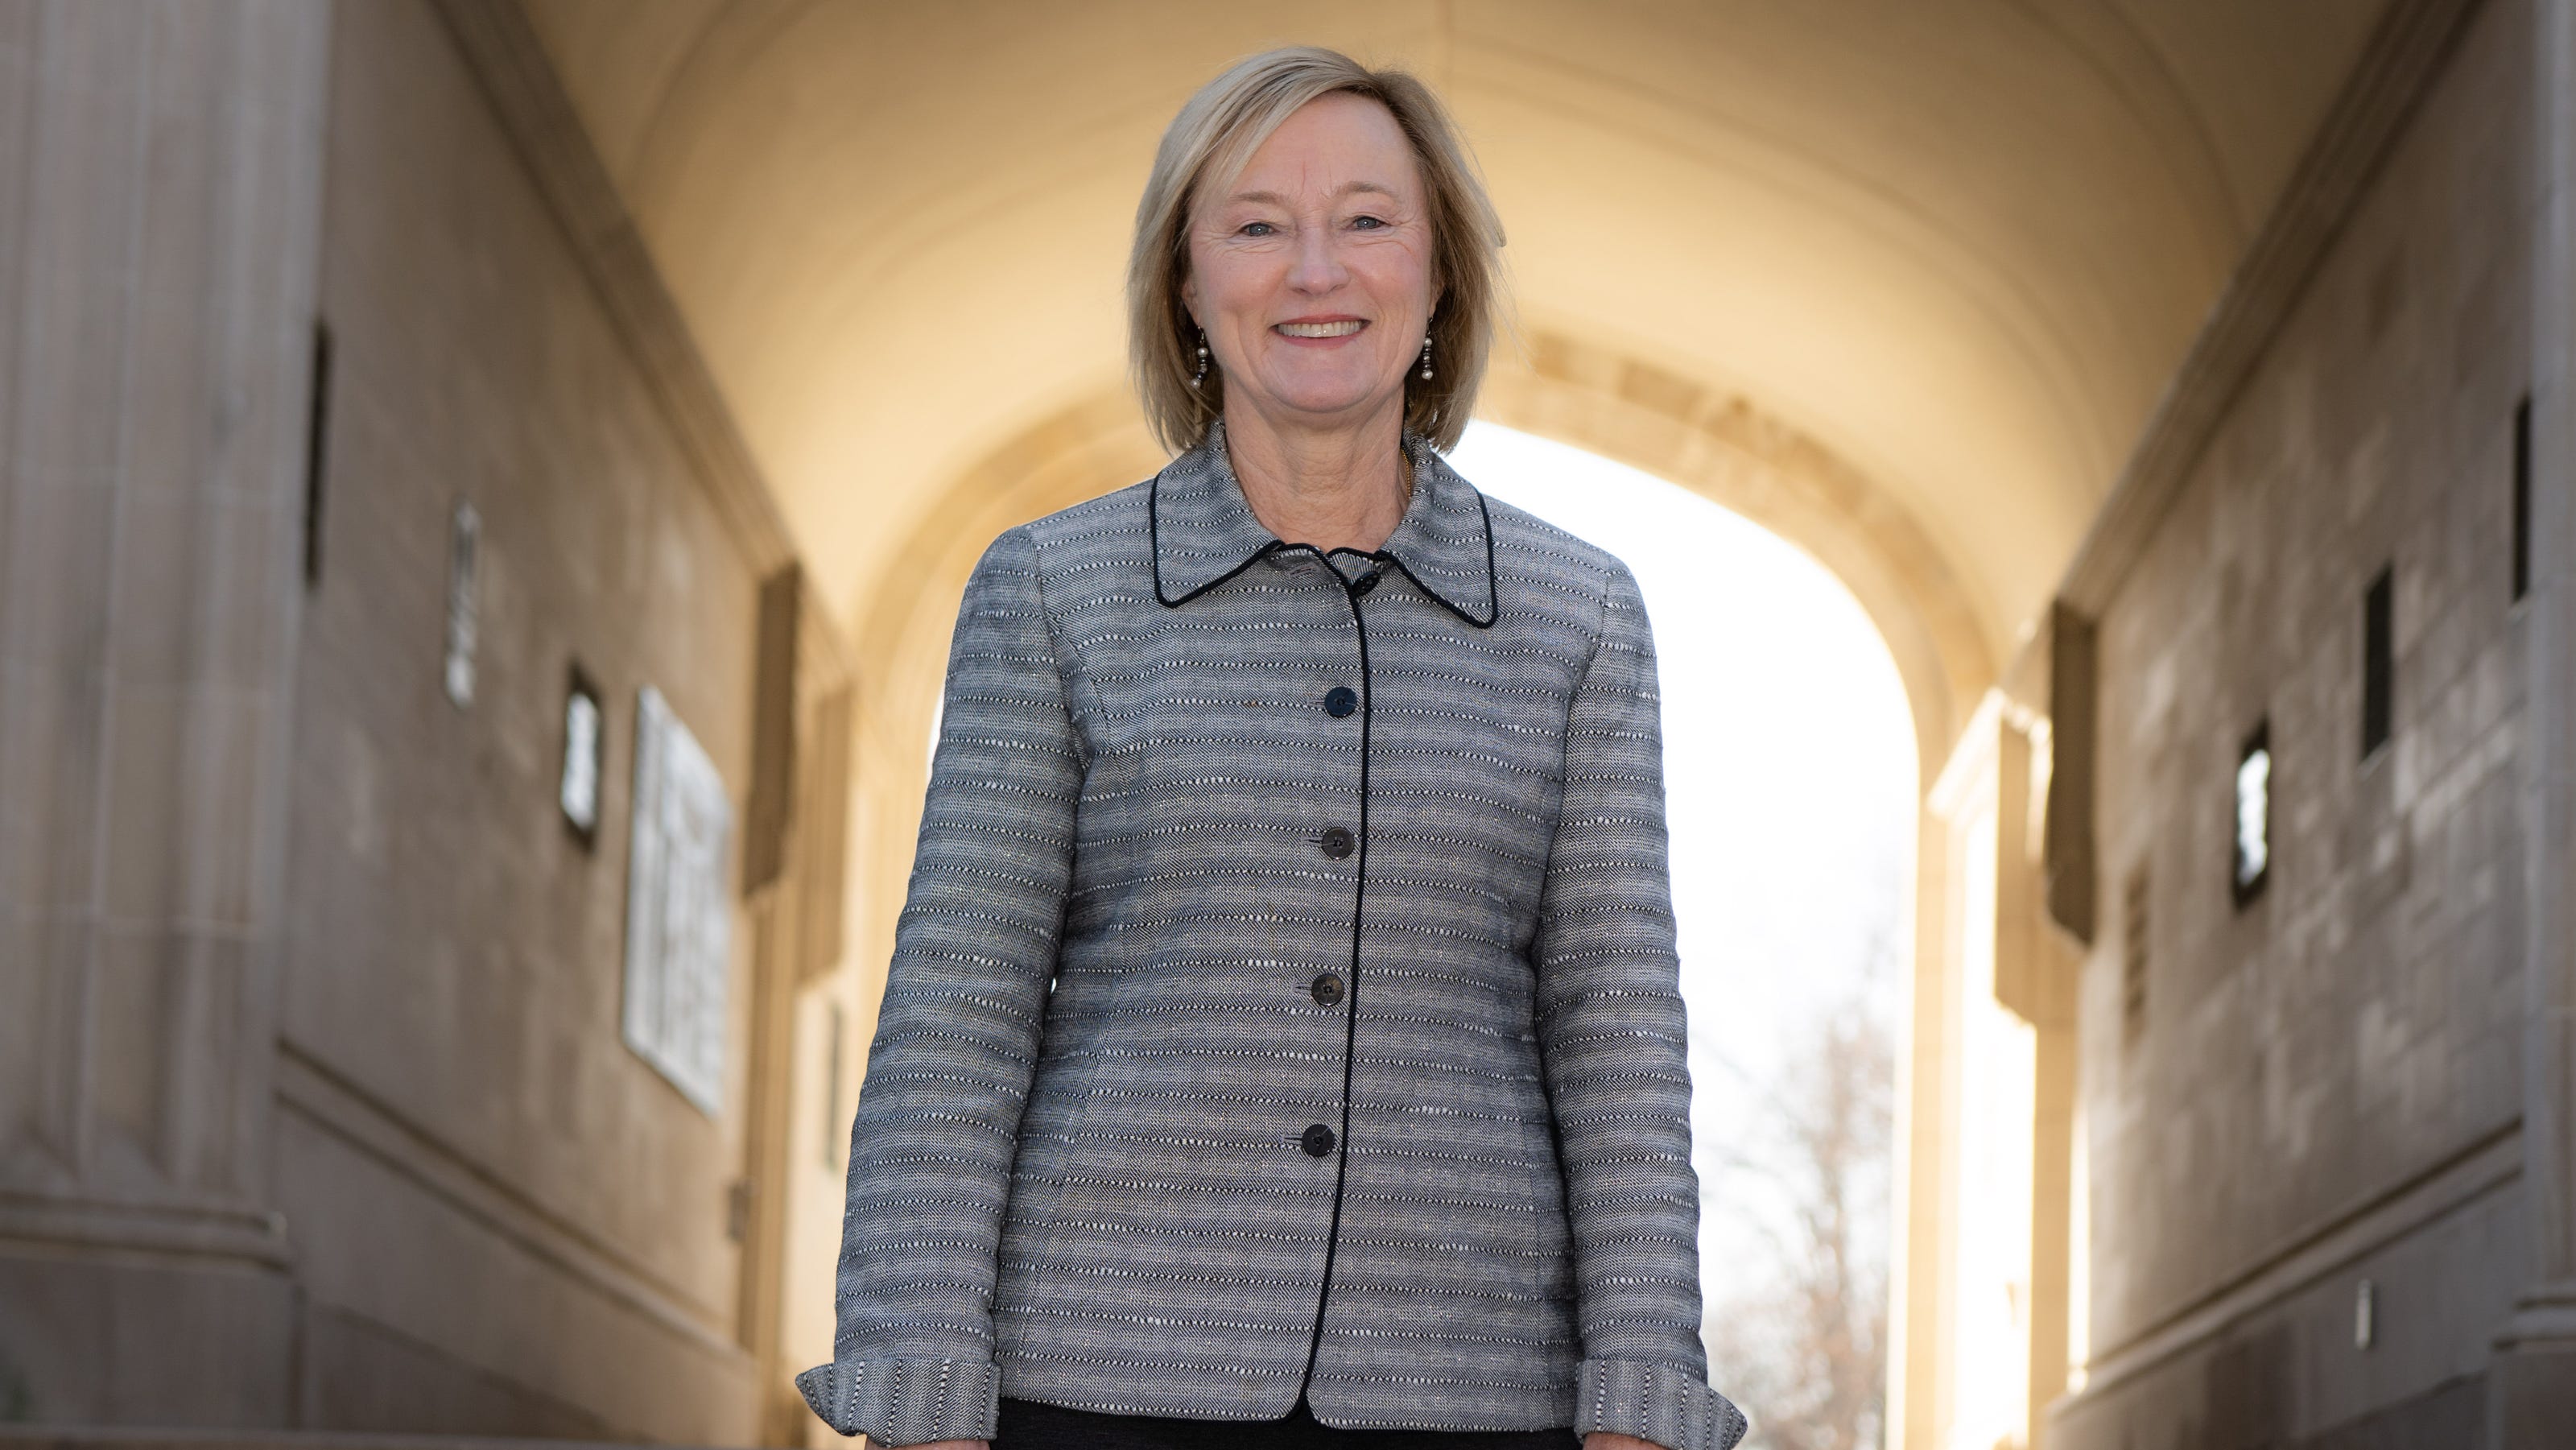  Sound the bagpipes: College of Wooster names its 13th (and second woman) president 